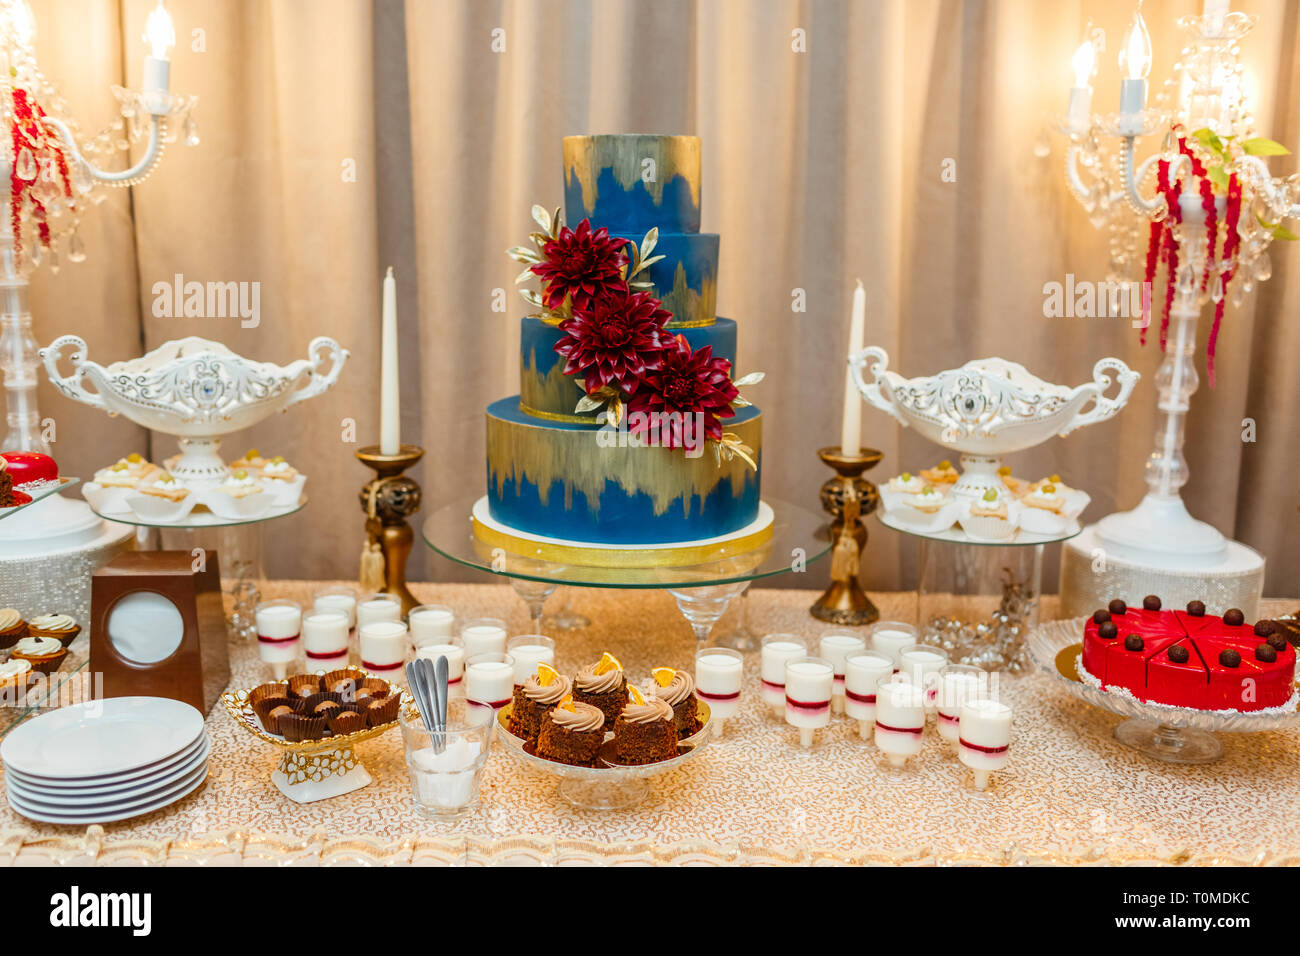 Candy Bar Blue Wedding Cake Decorated By Flowers Standing Of Festive Table With Deserts Strawberry Tartlet And Cupcakes Wedding Reception Tartlets Stock Photo Alamy